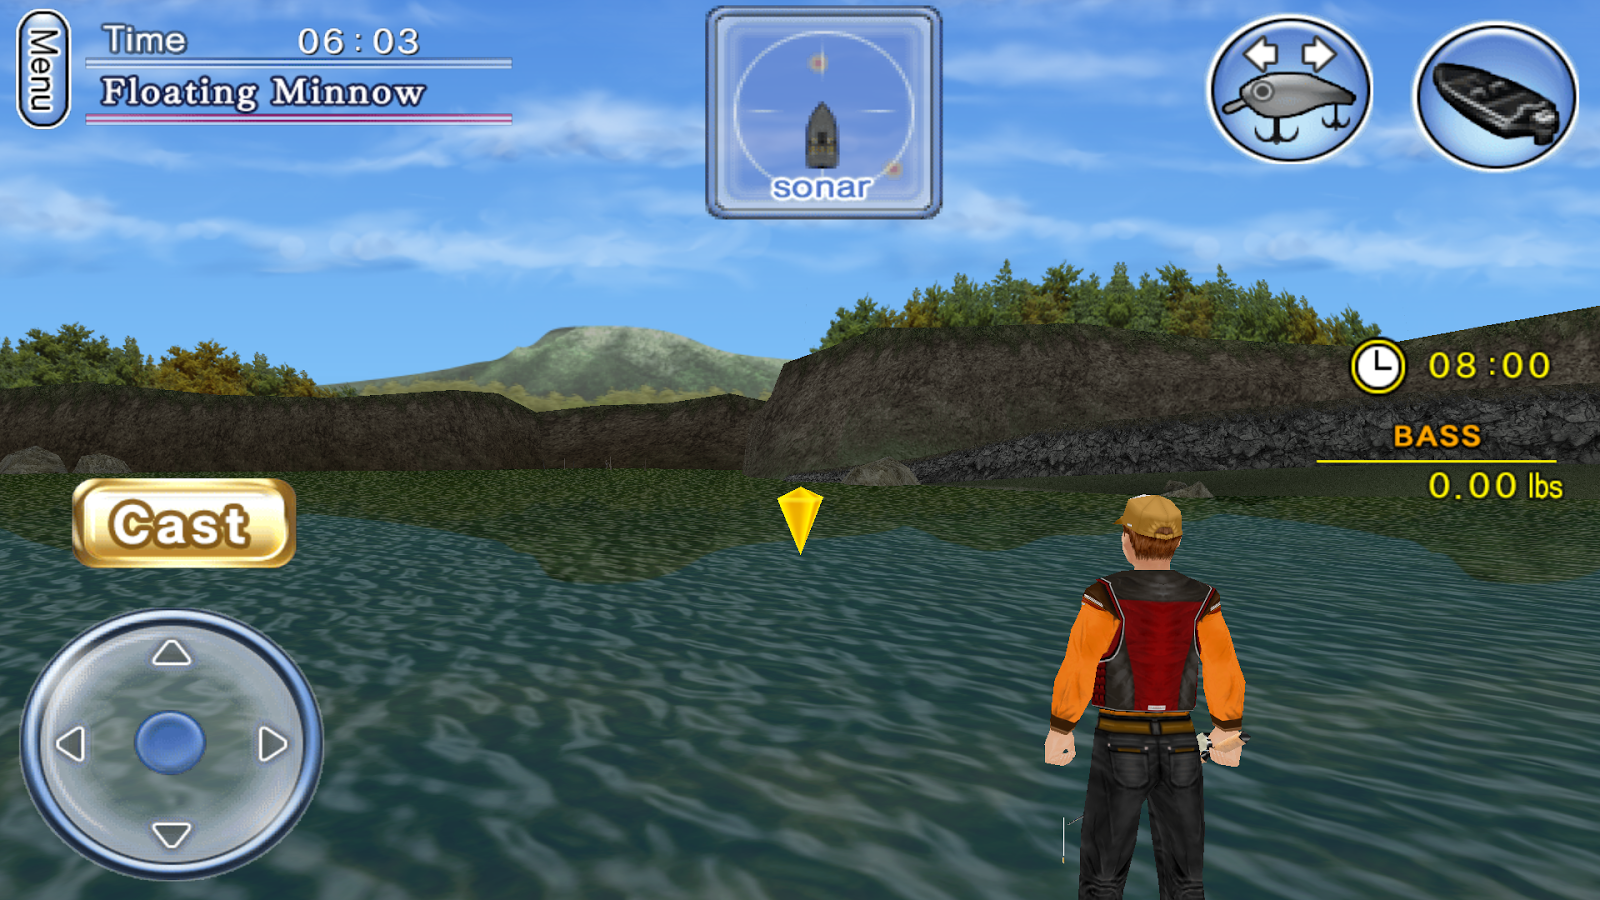 Bass Fishing 3D on the Boat - Android Apps on Google Play